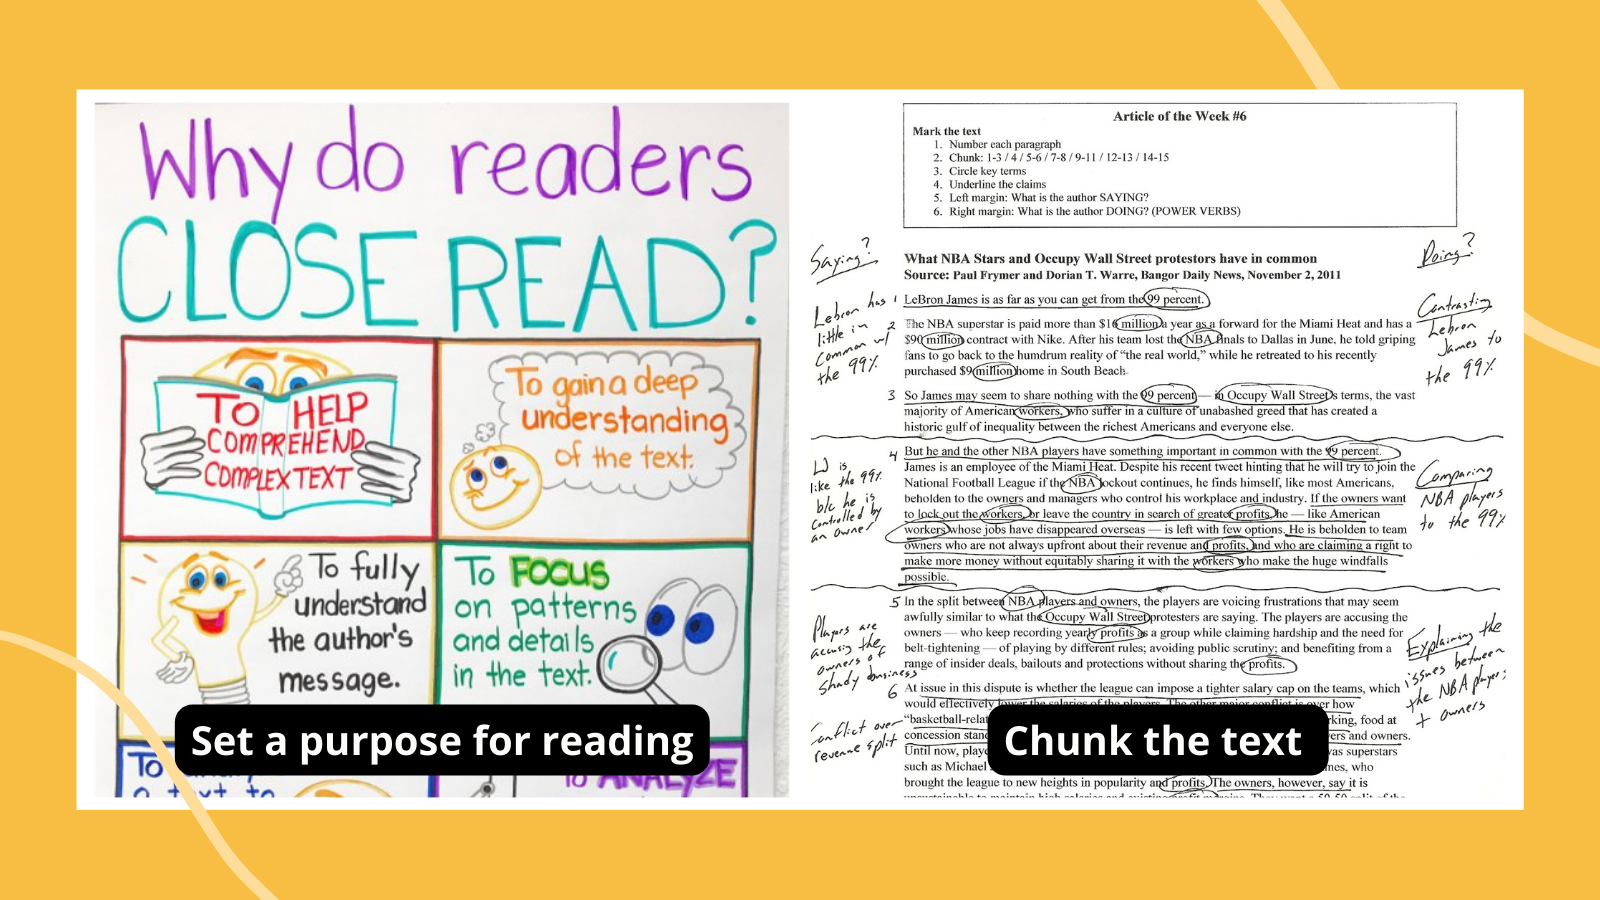 Strategies for close reading featured including an anchor chart to help set the purpose for reading and a page of text that has been annotated.